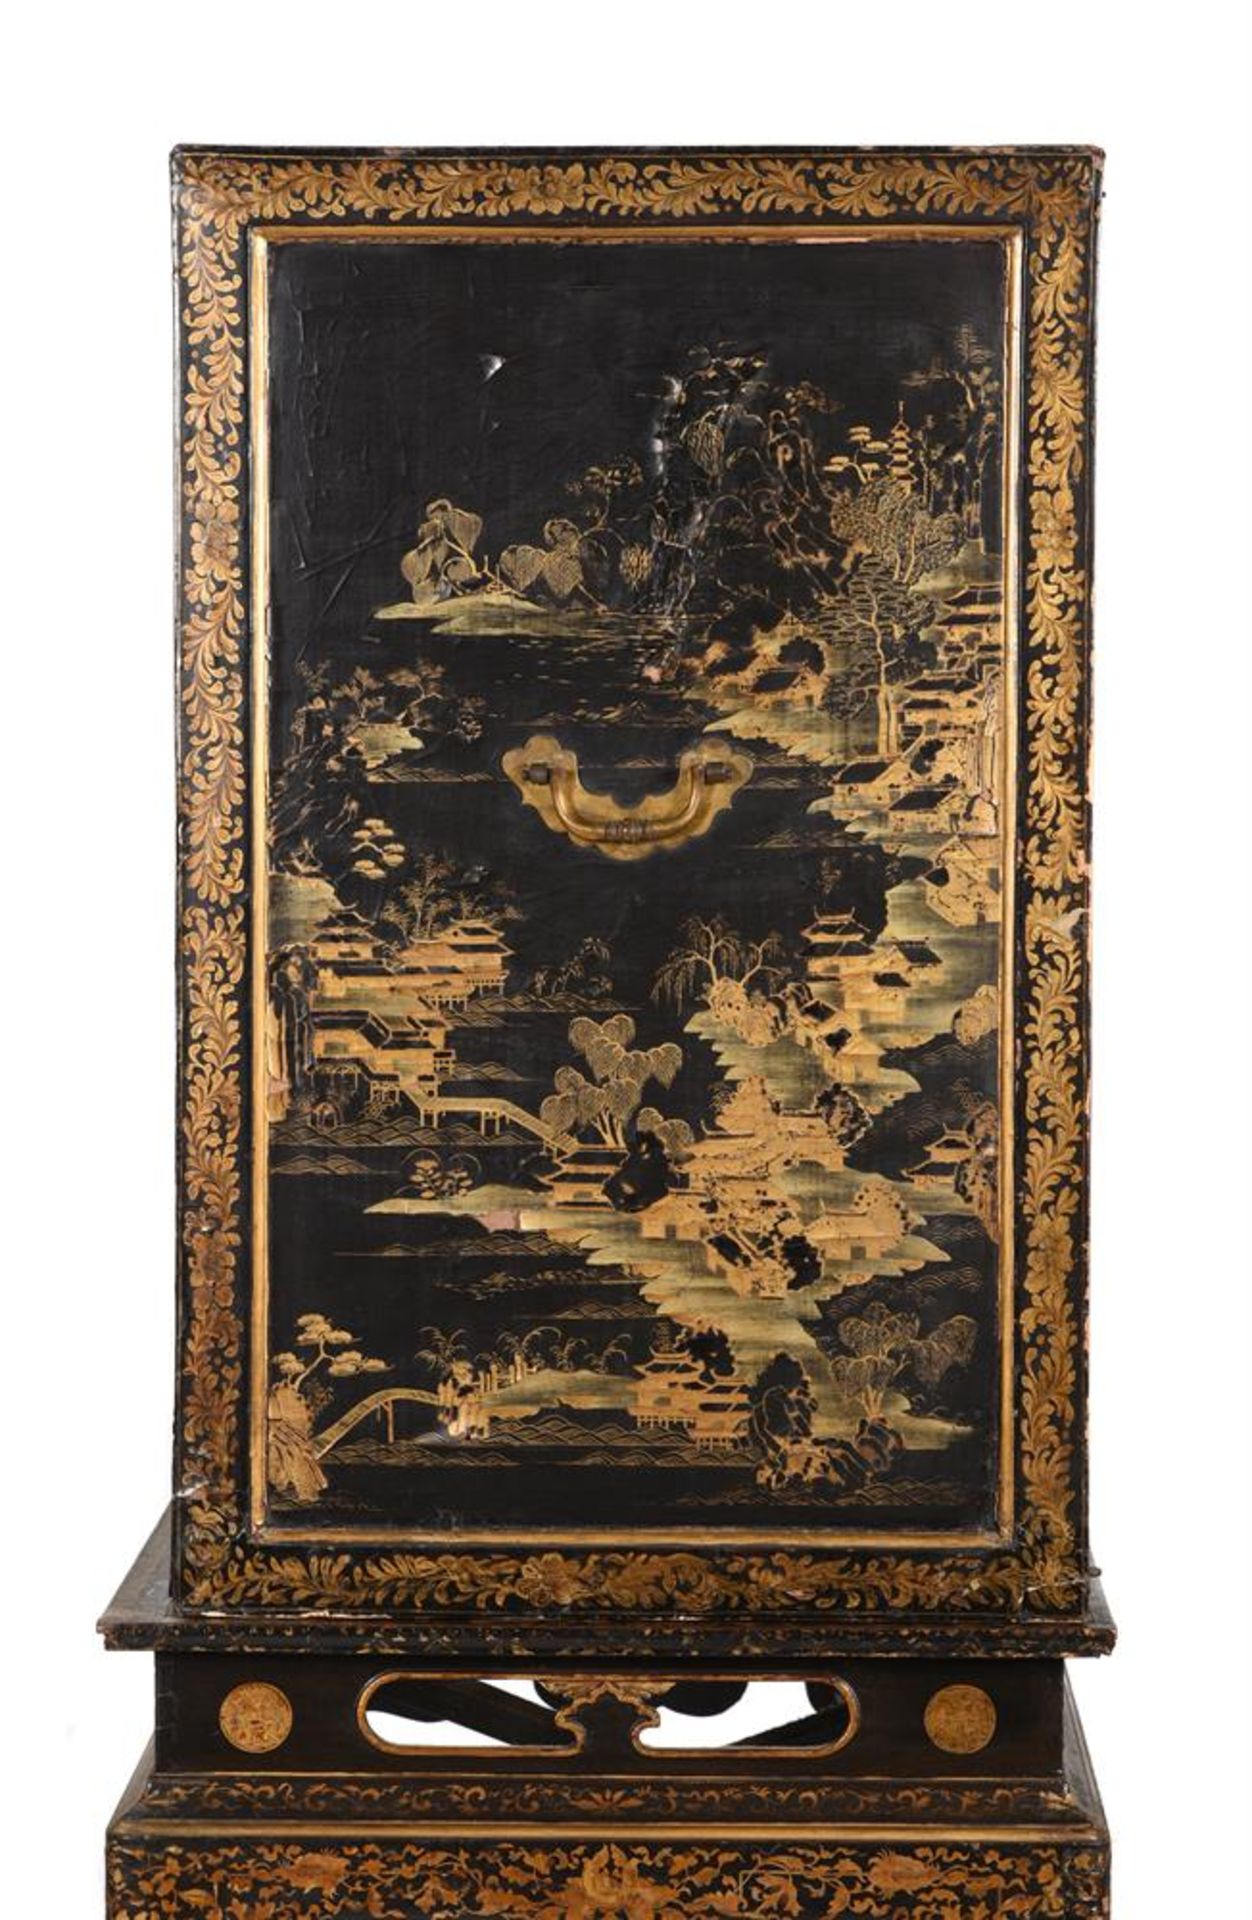 A CHINESE EXPORT LACQUER CABINET ON STAND, LATE 18TH OR EARLY 19TH CENTURY - Bild 12 aus 15